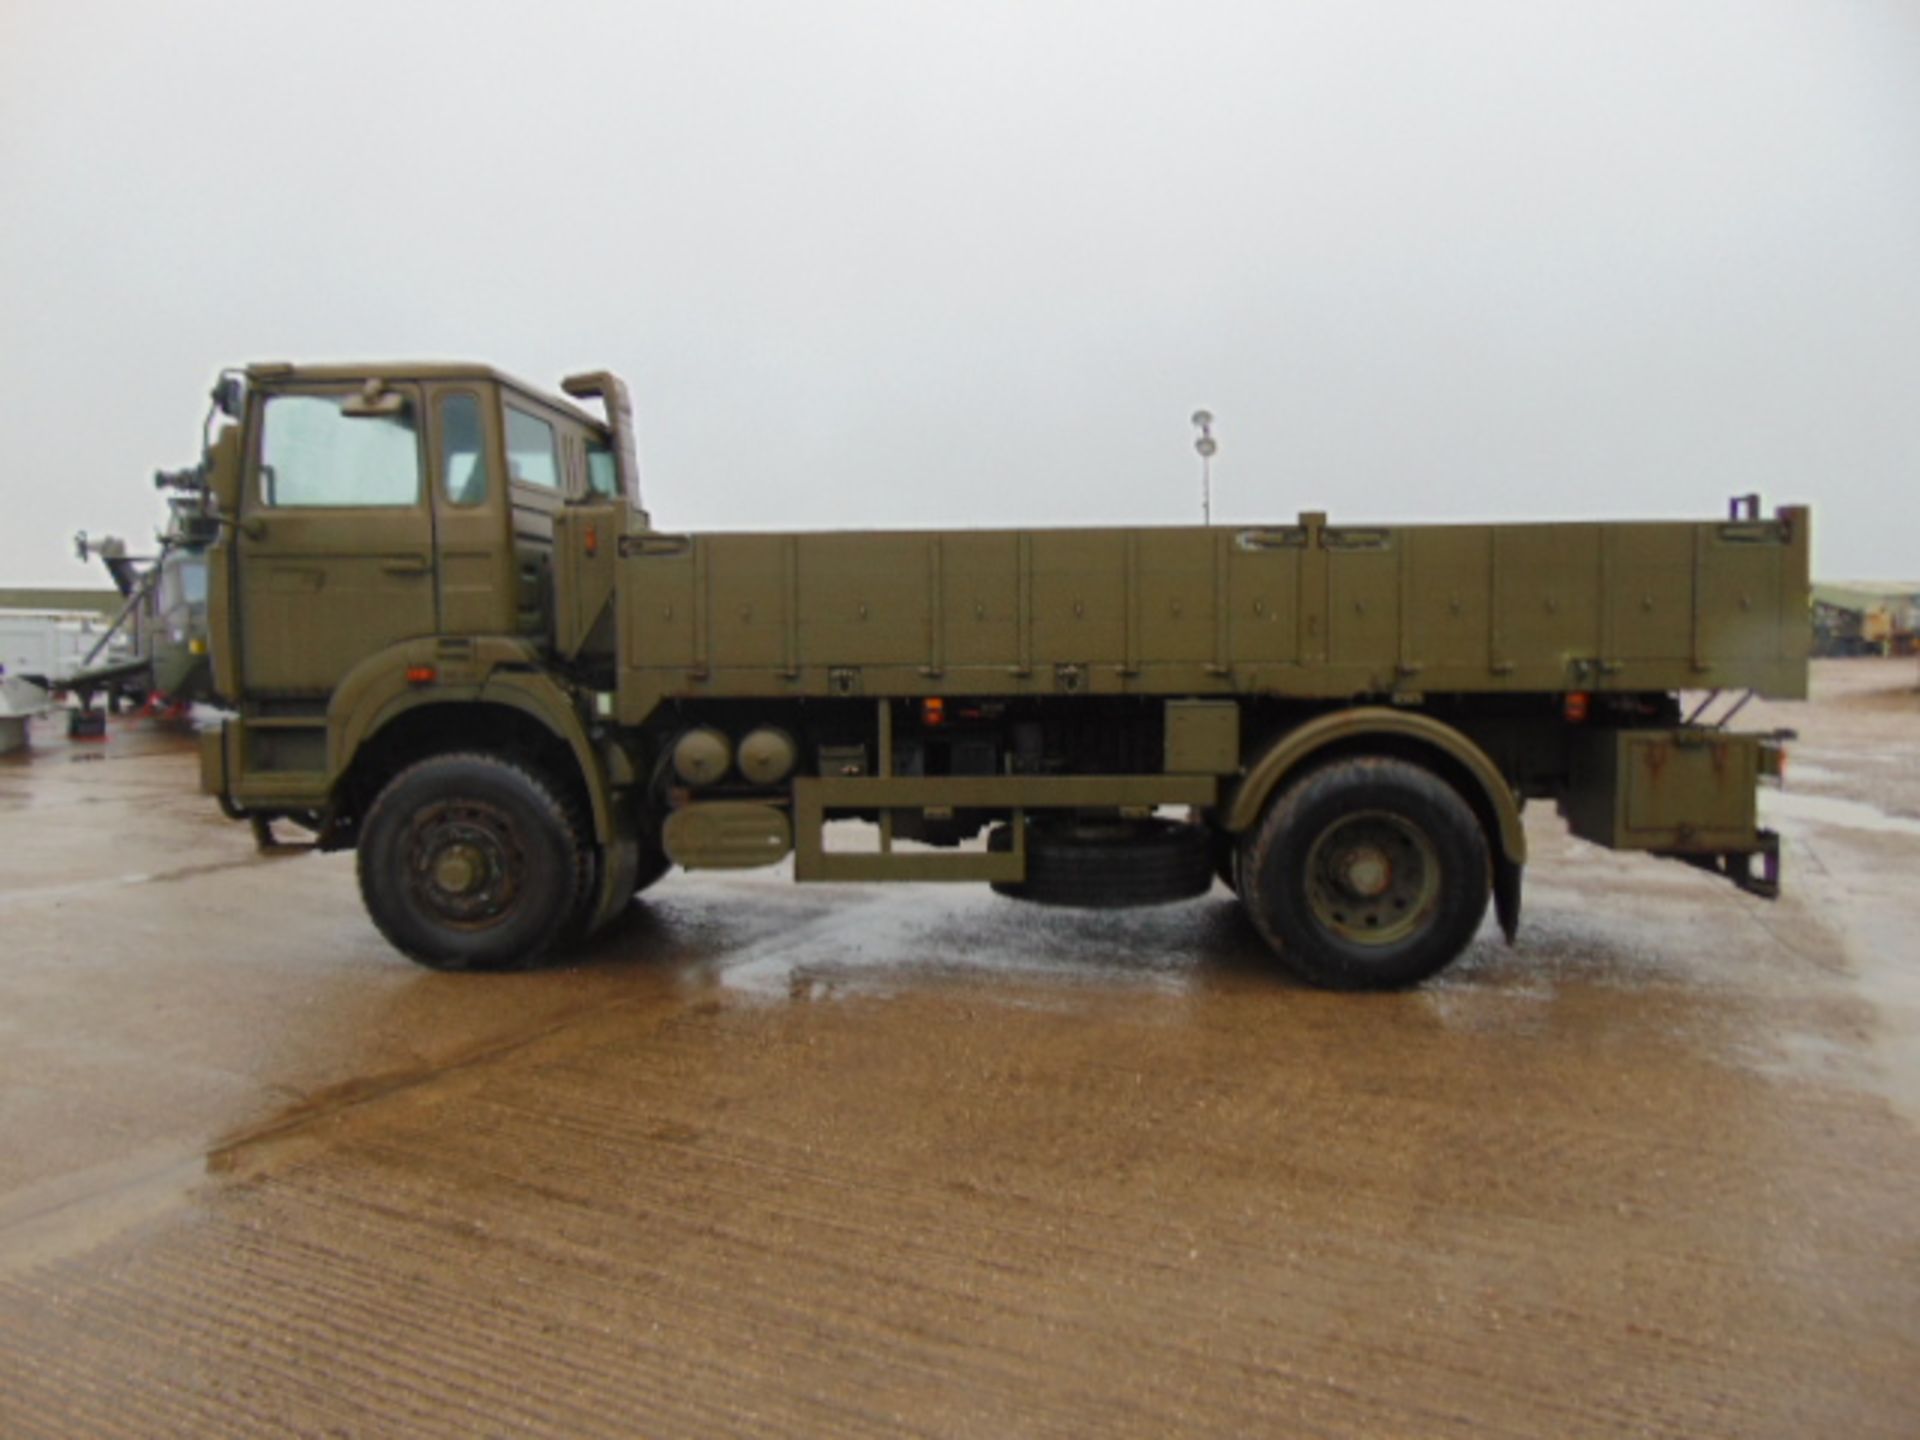 Renault G300 Maxter RHD 4x4 8T Cargo Truck with Fitted Winch - Image 4 of 17